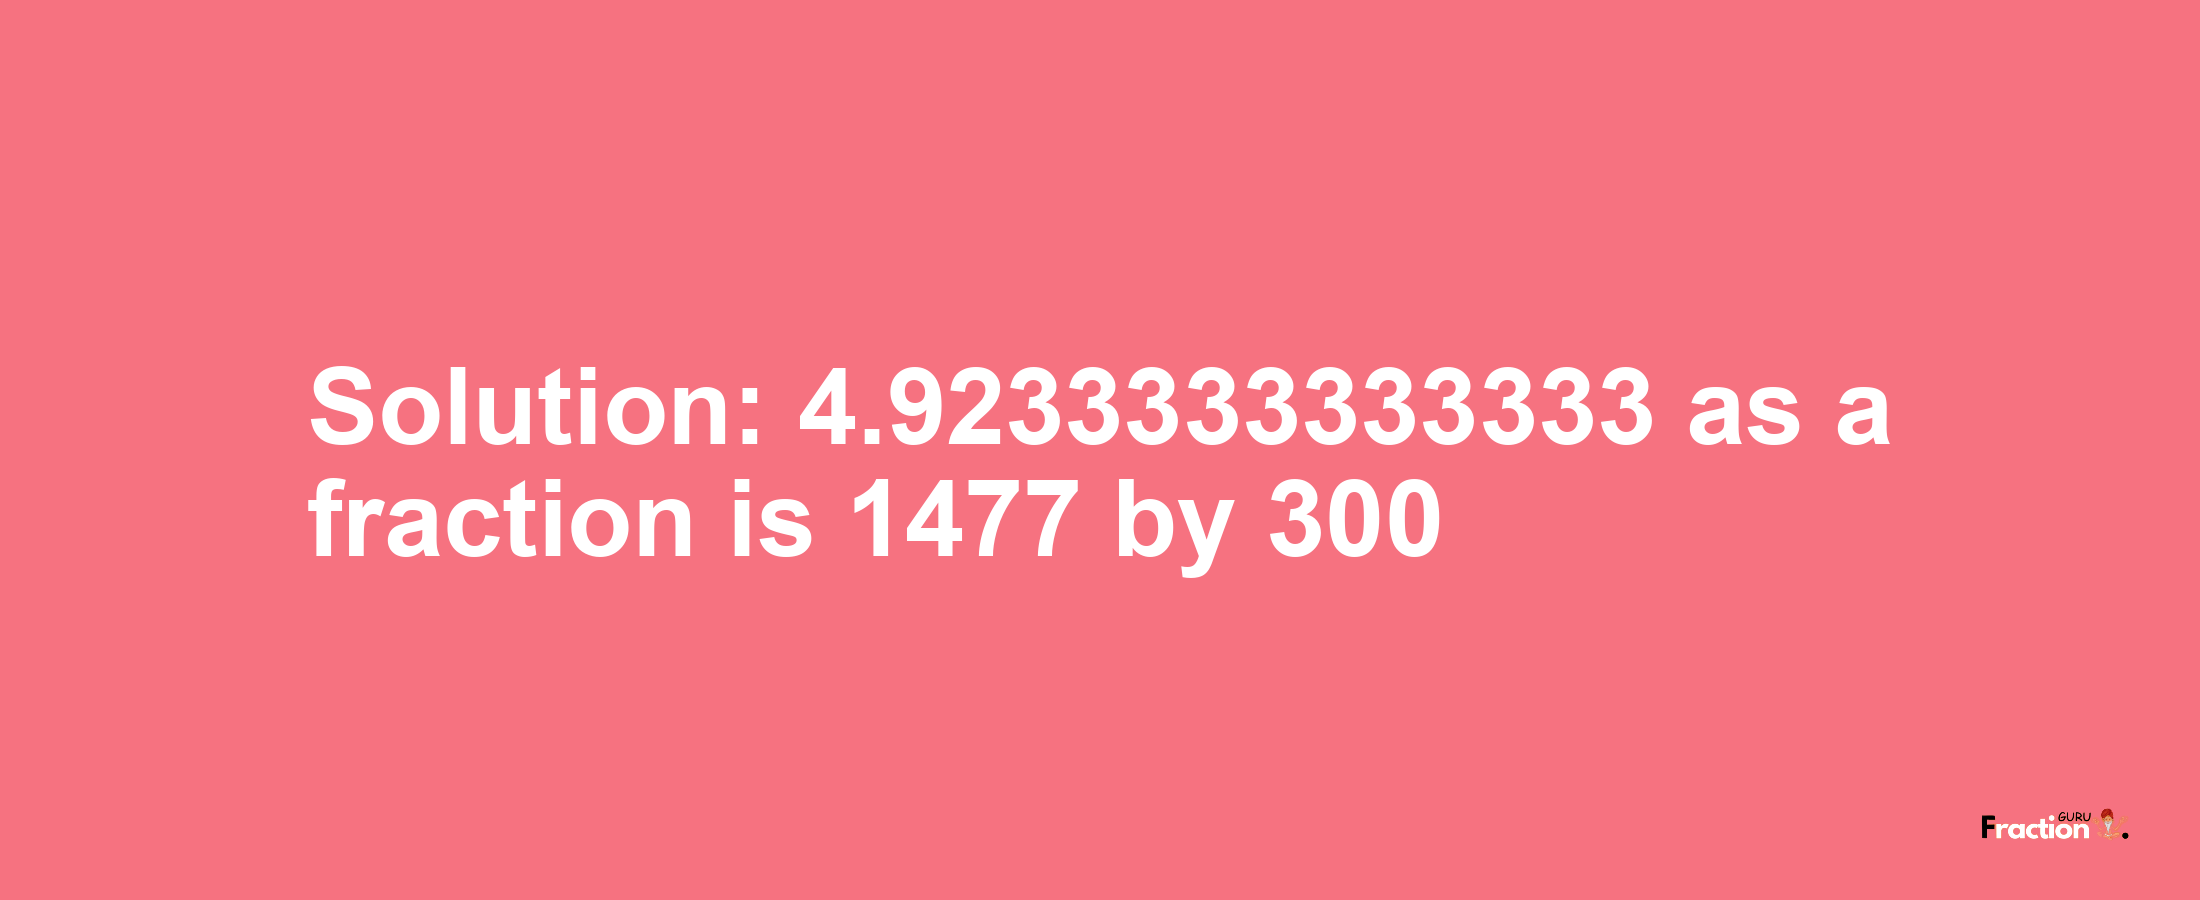 Solution:4.9233333333333 as a fraction is 1477/300